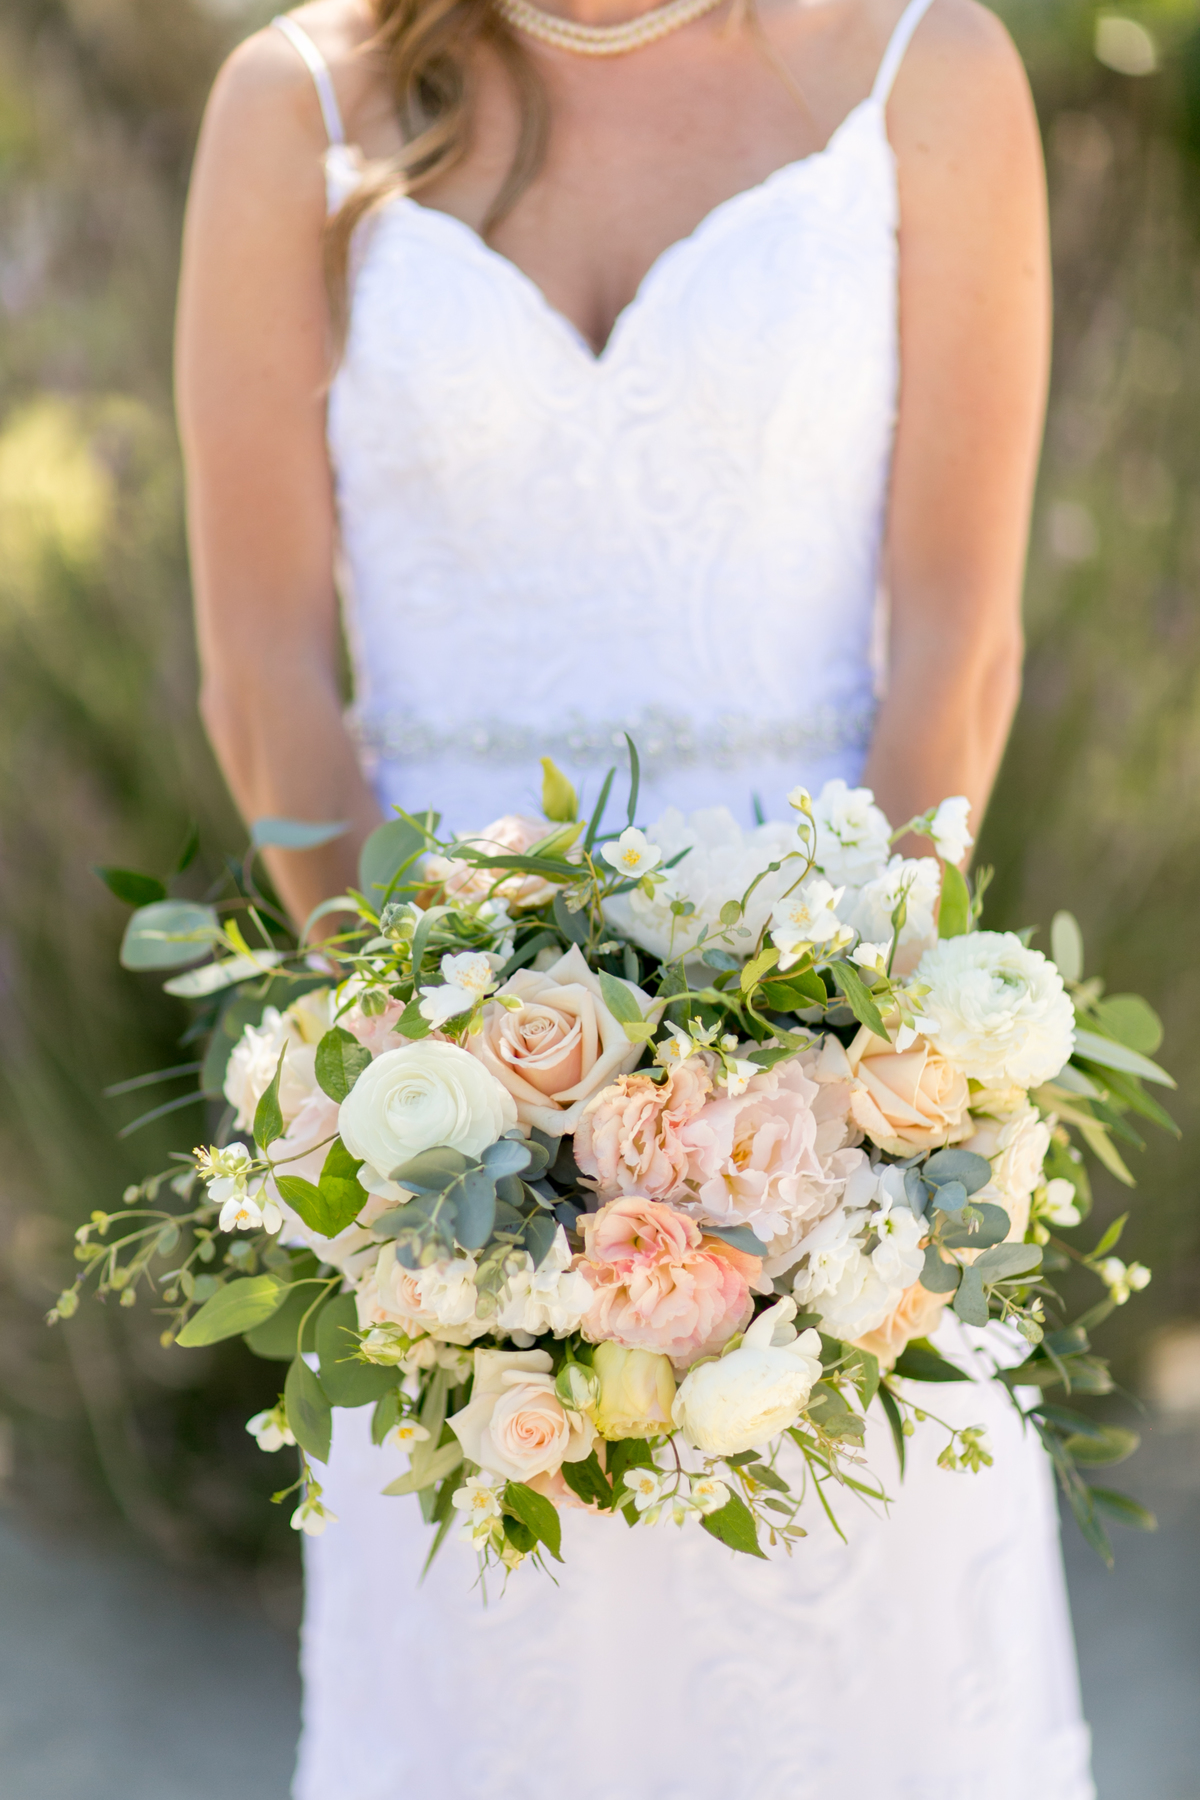 Blush and Peach Bridal Bouquet at Croad Vineyard Wedding by SLO Wedding Florist Flowers By Denise 